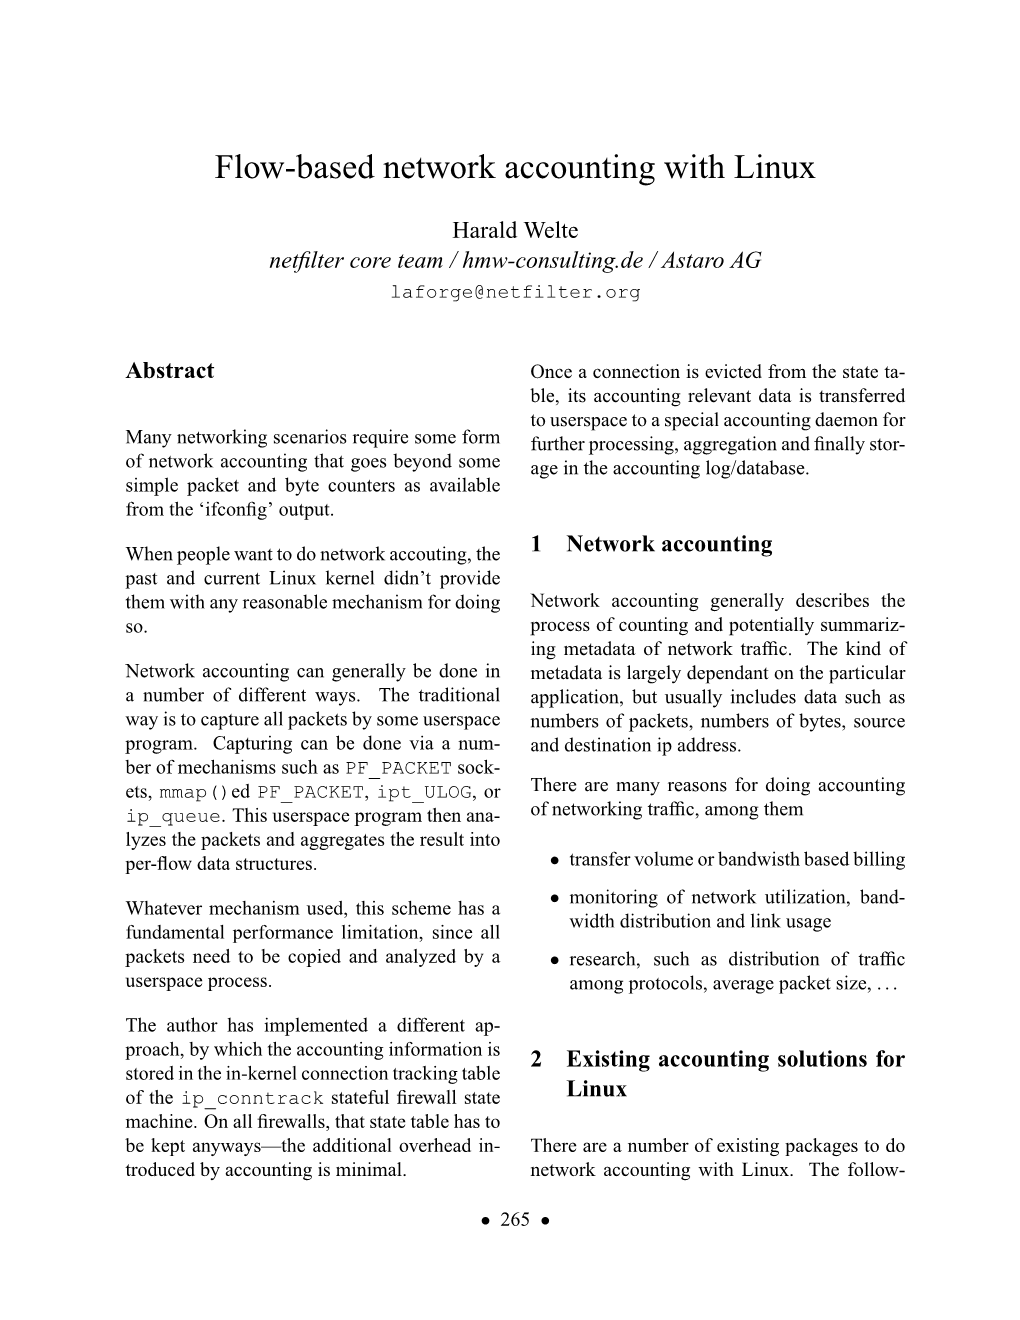 Flow-Based Network Accounting with Linux